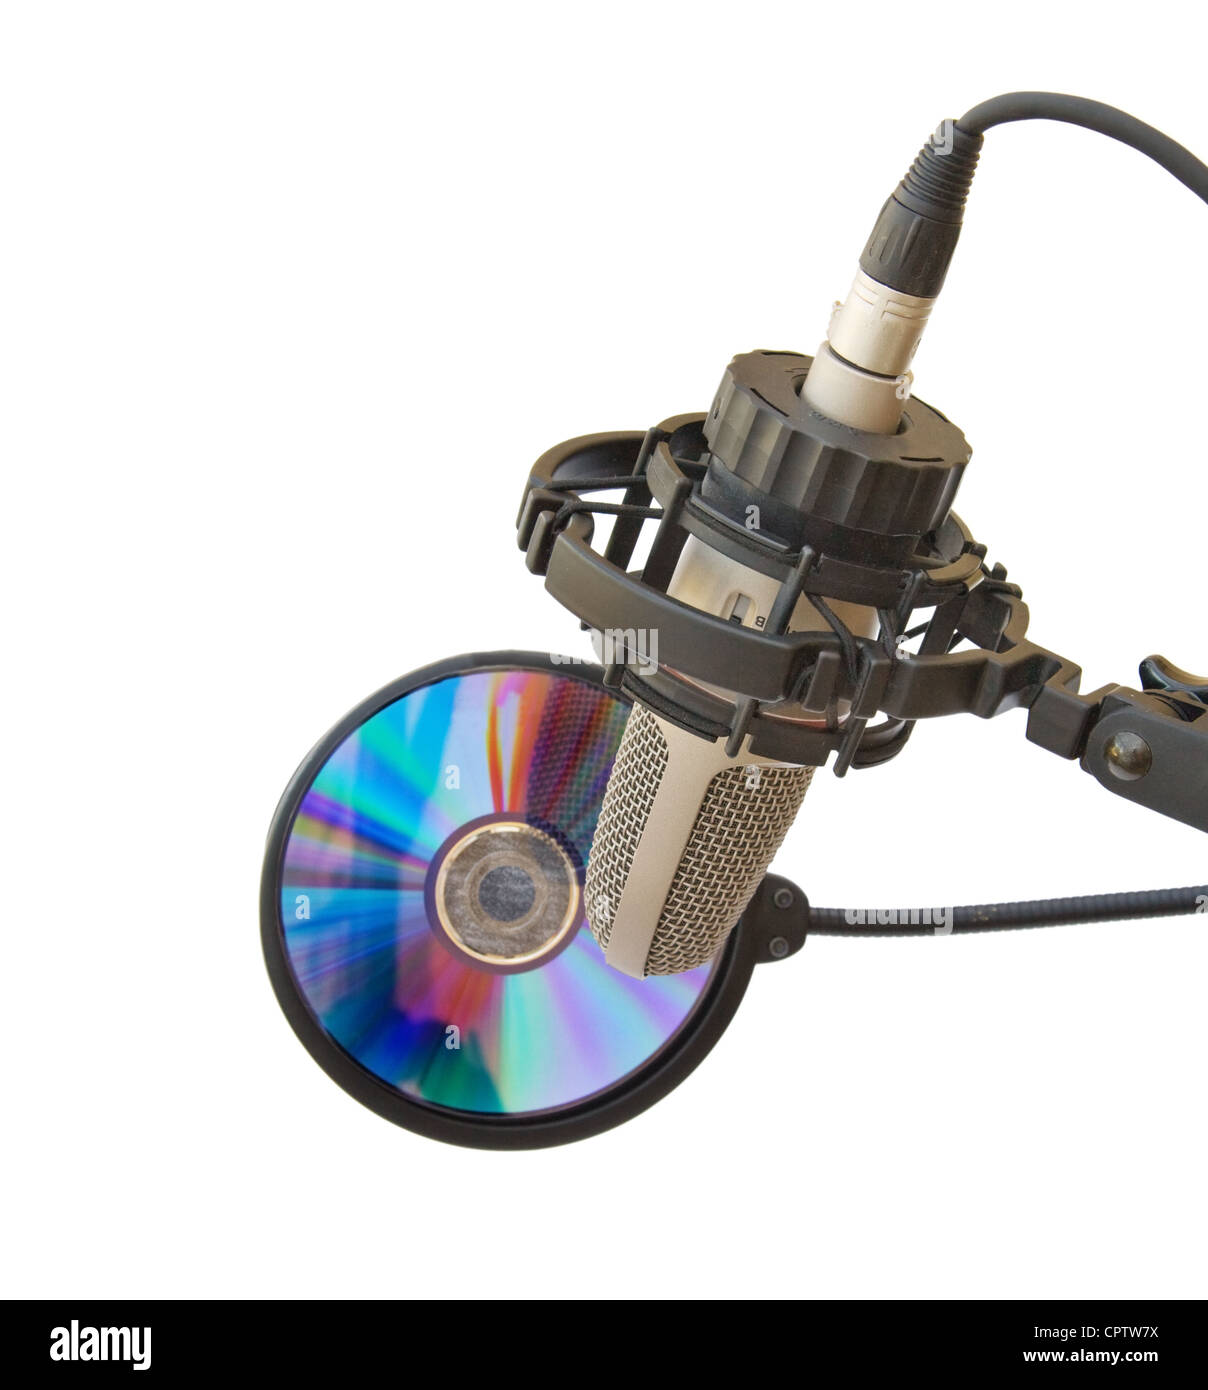 Recording music - with studio microphone and colourful CD. Isolated over white background. Stock Photo